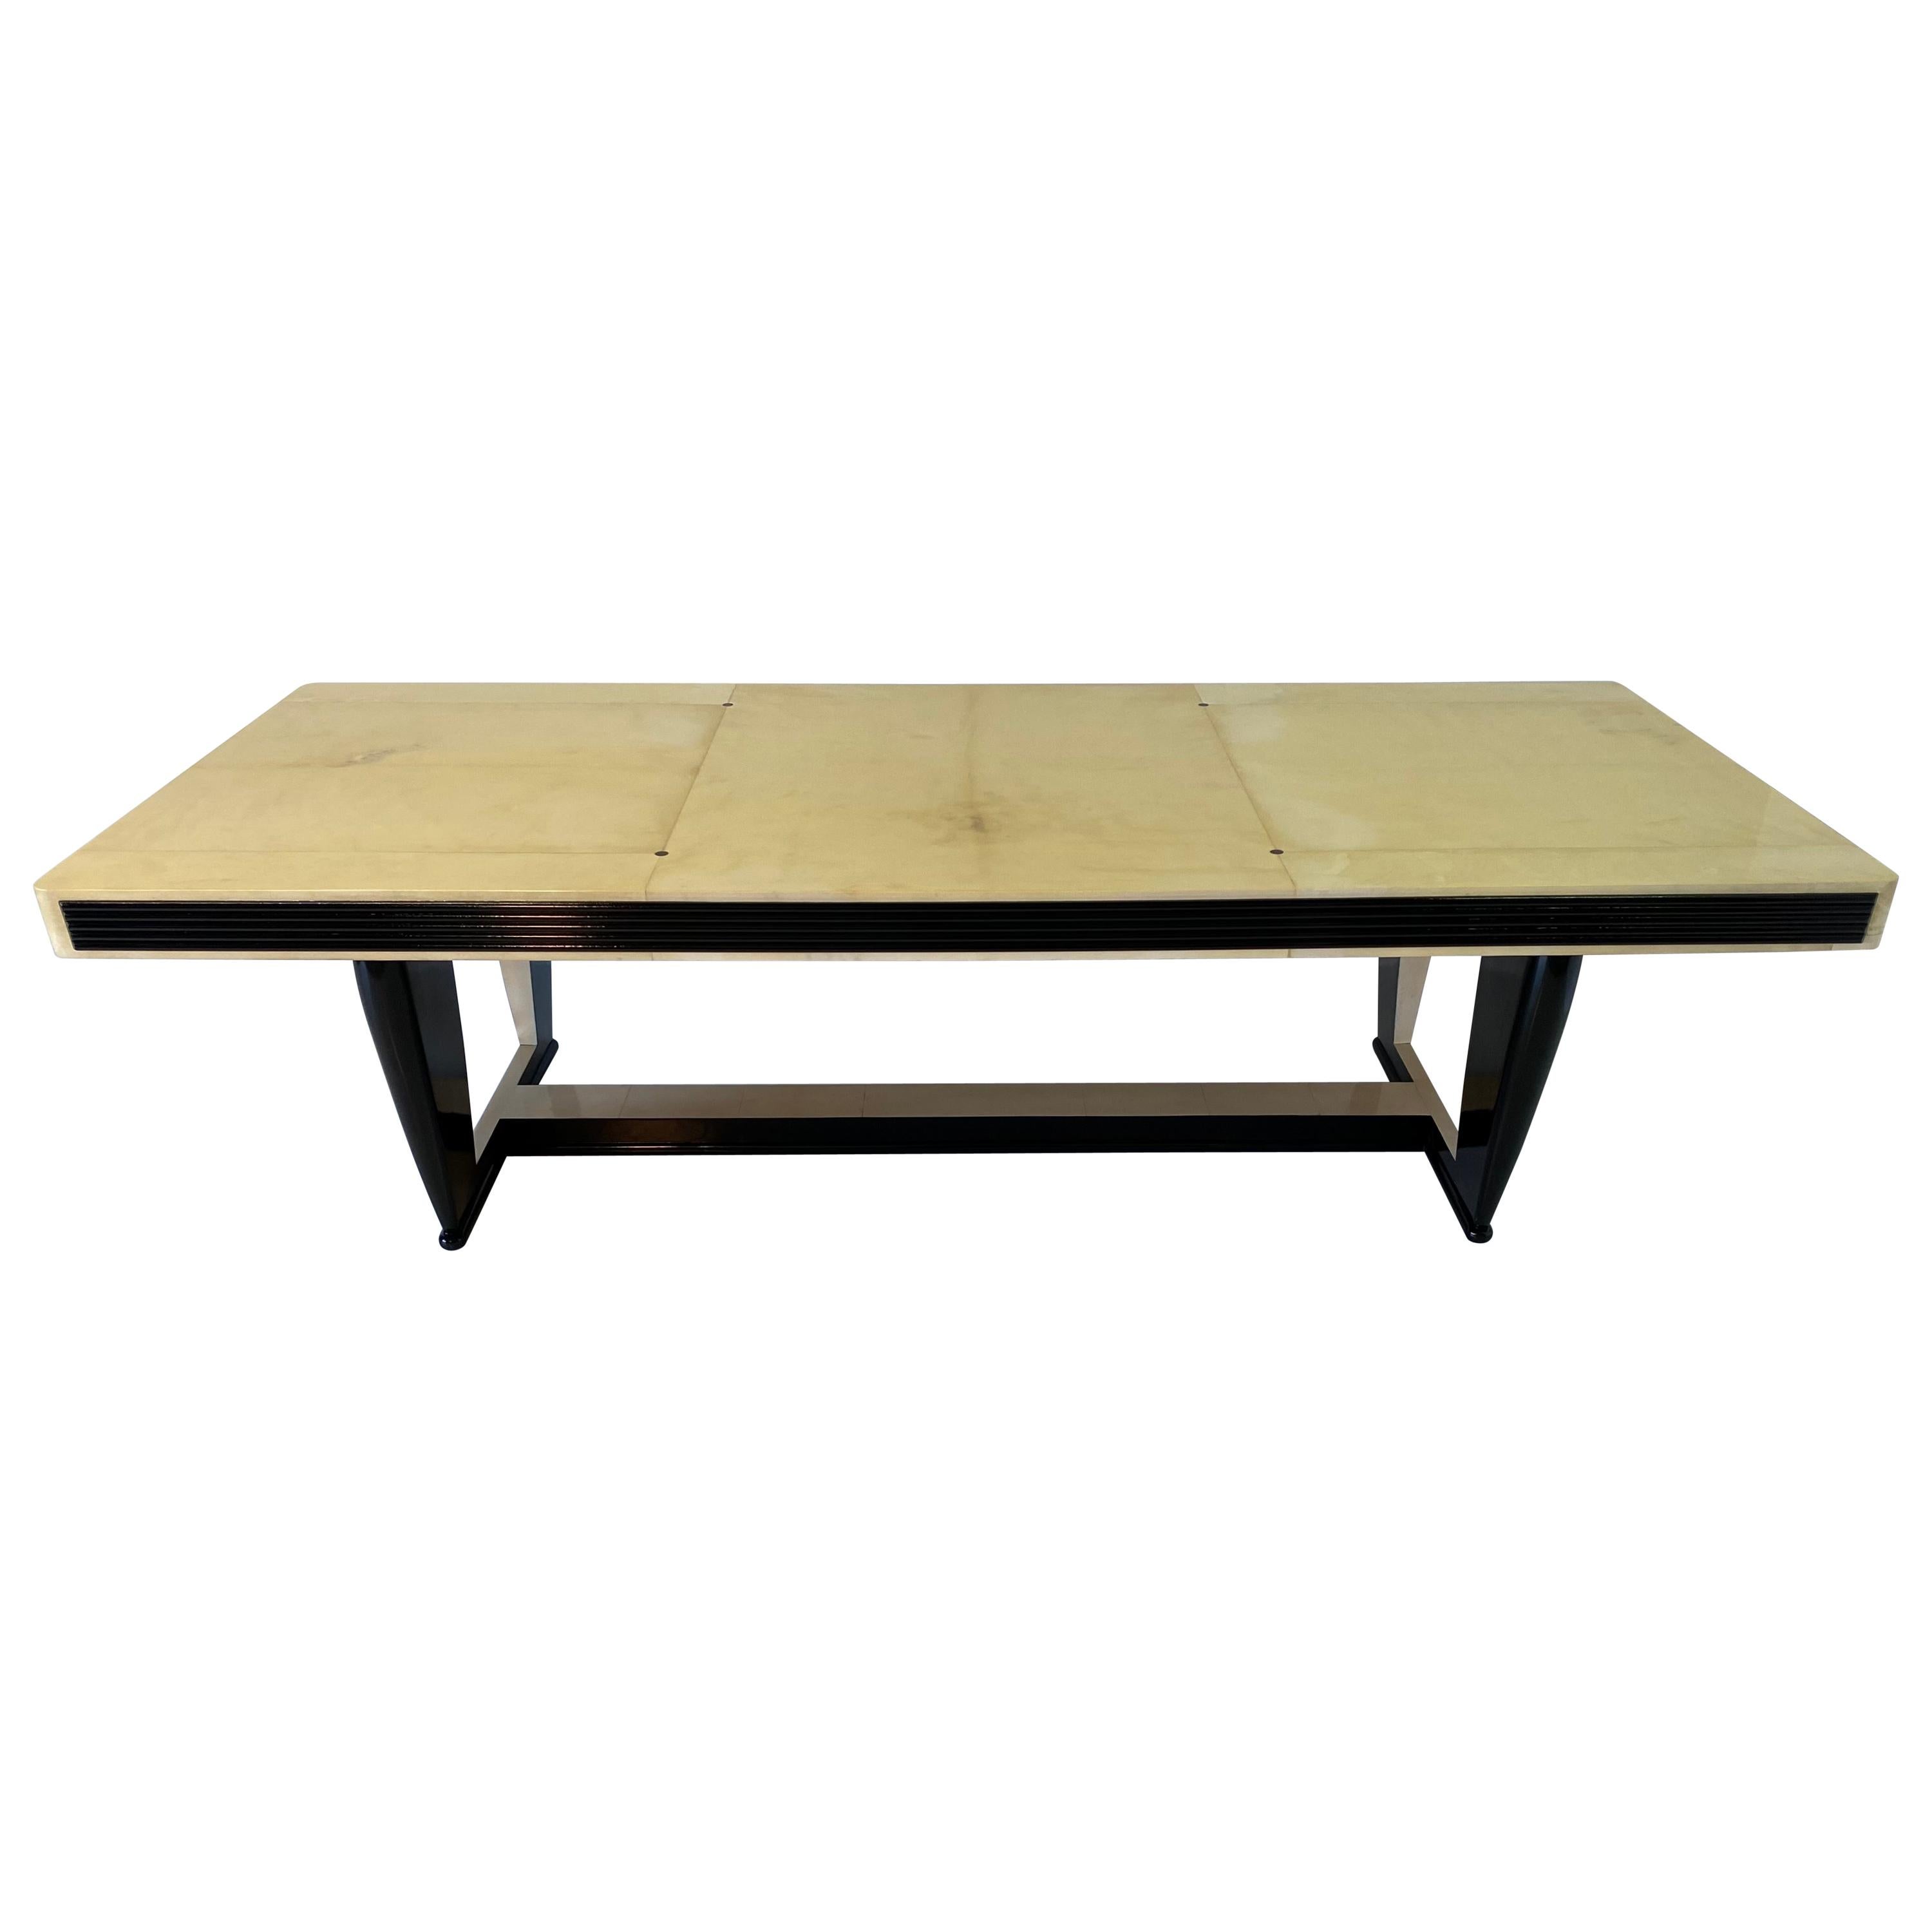 Exclusive Italian Art Deco Parchment Dining Table, 1940s